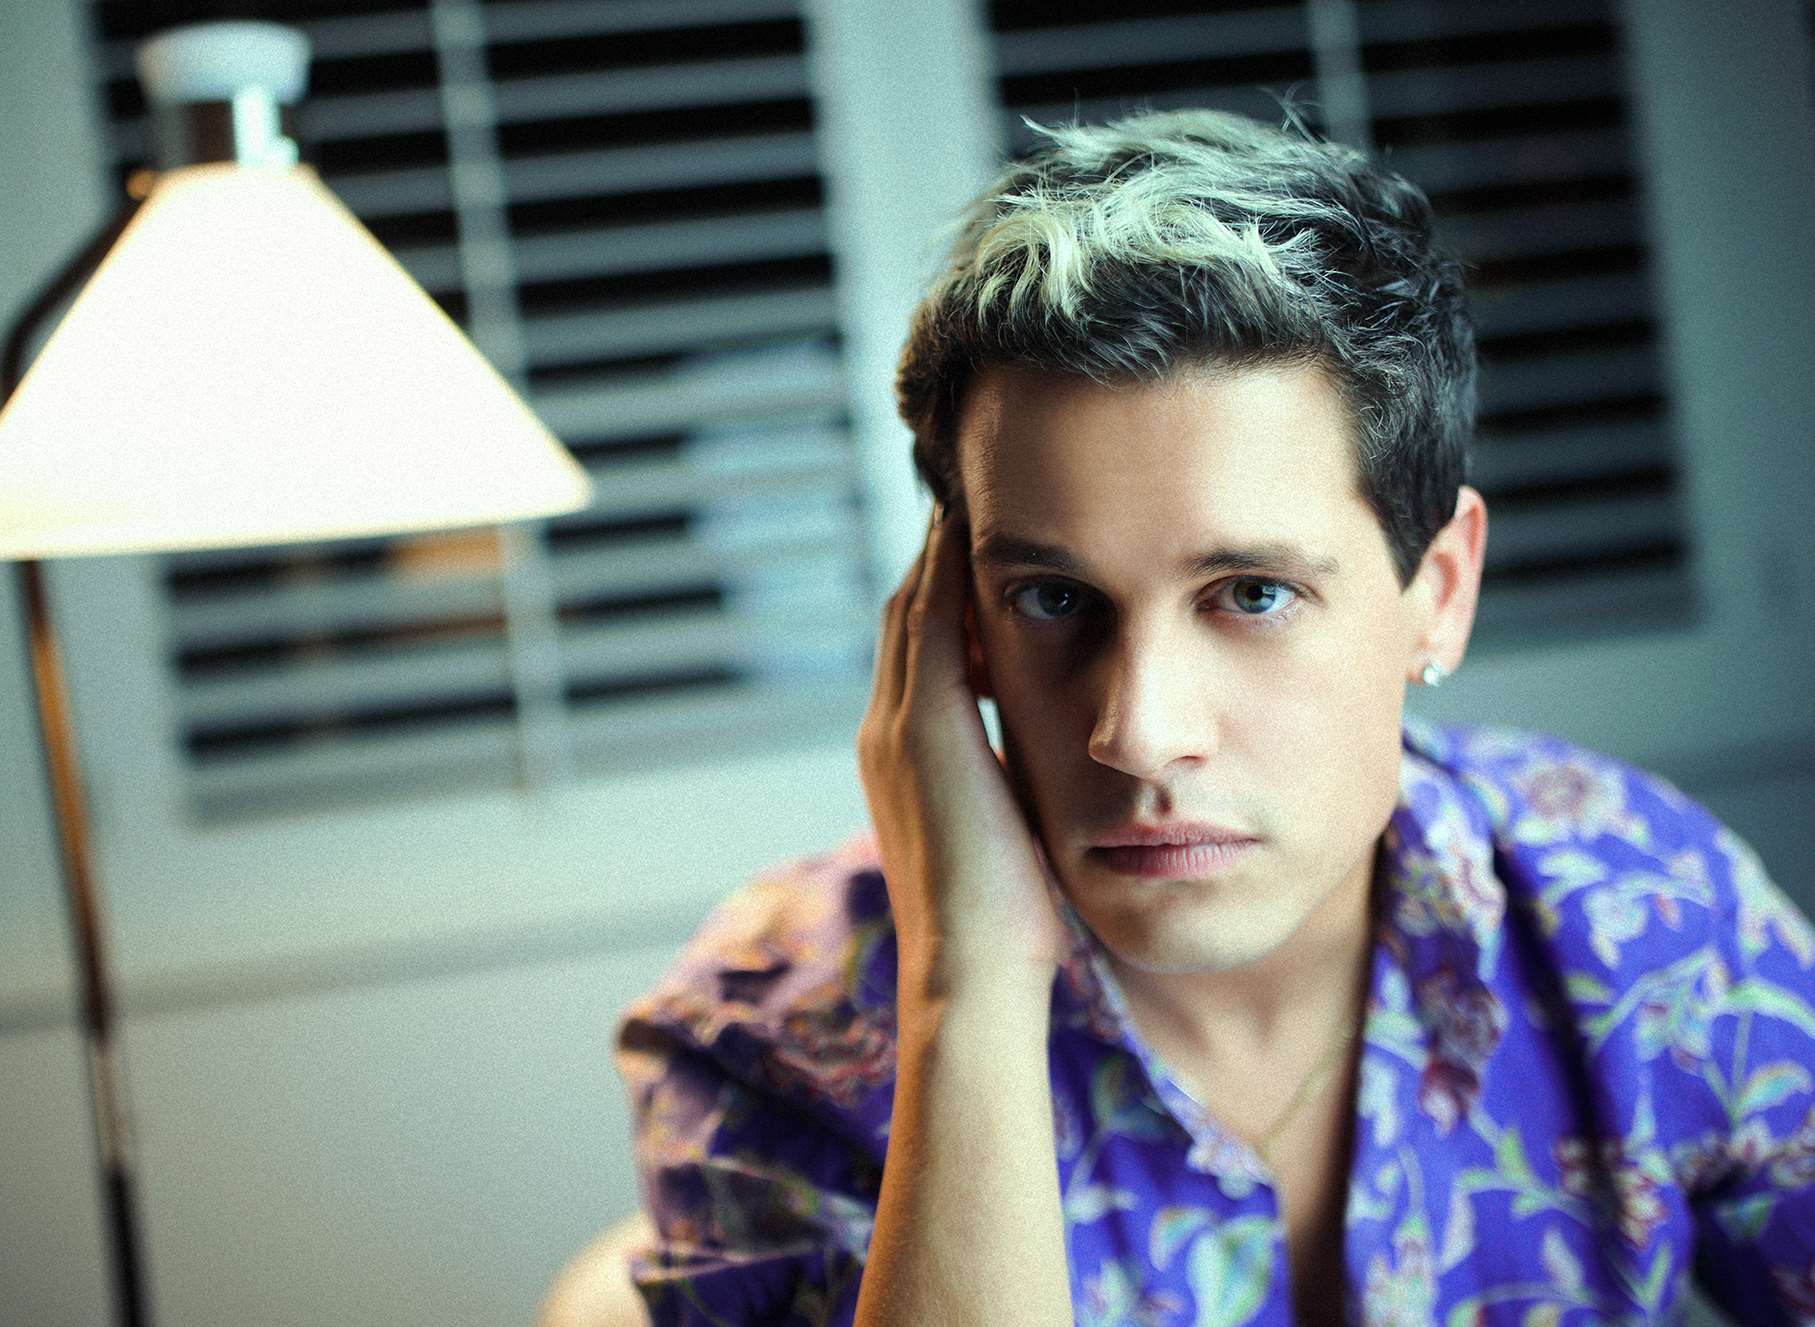 Ex-Langton schoolboy Milo Yiannopoulos has caused outrage over child sex comments. Picture: Mike Allen